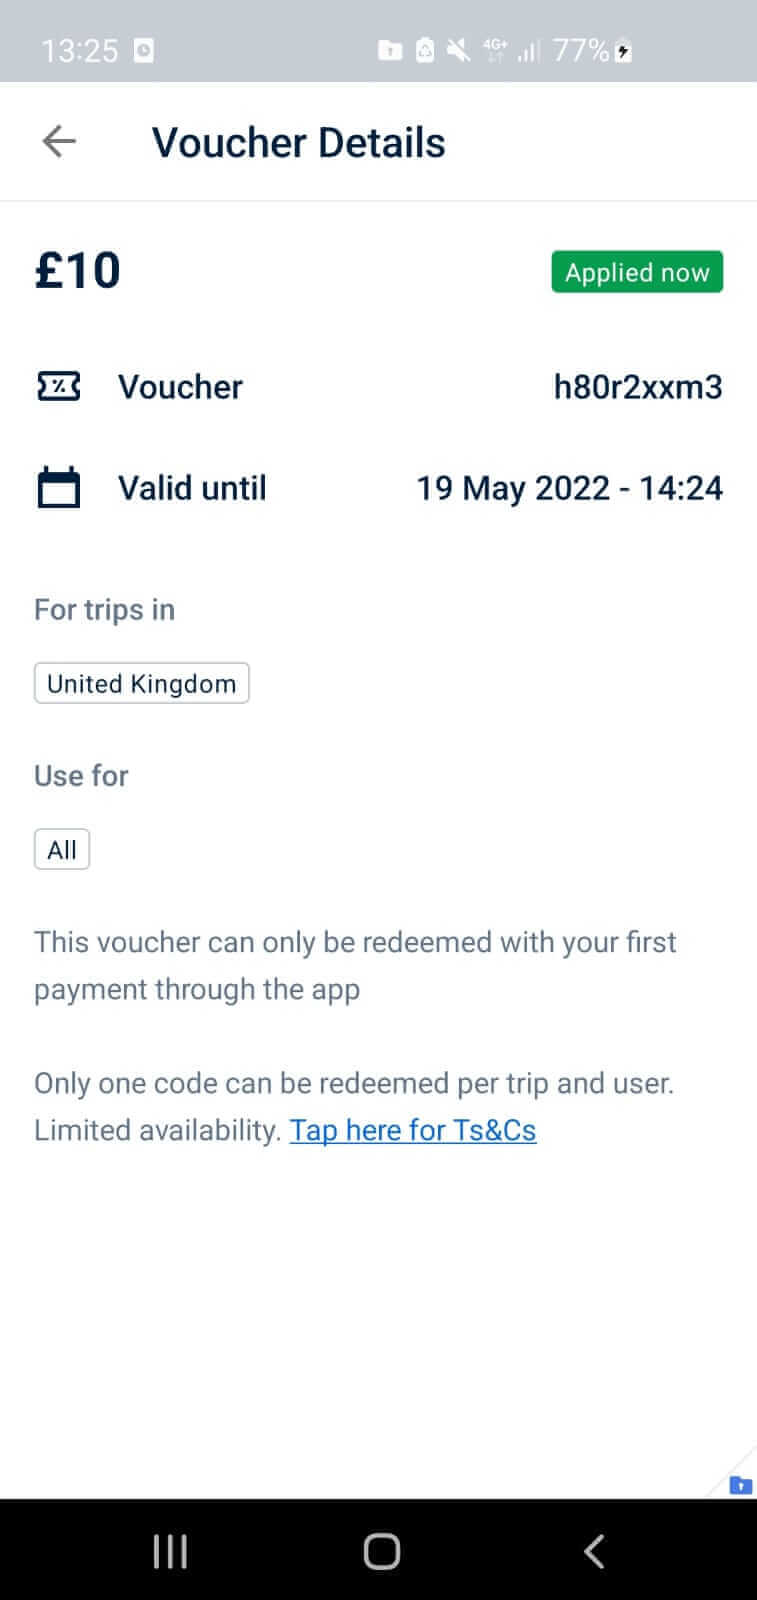 Free Now London voucher £10 GBP discount credits - code V98YS6X1Y valid 30 days. 